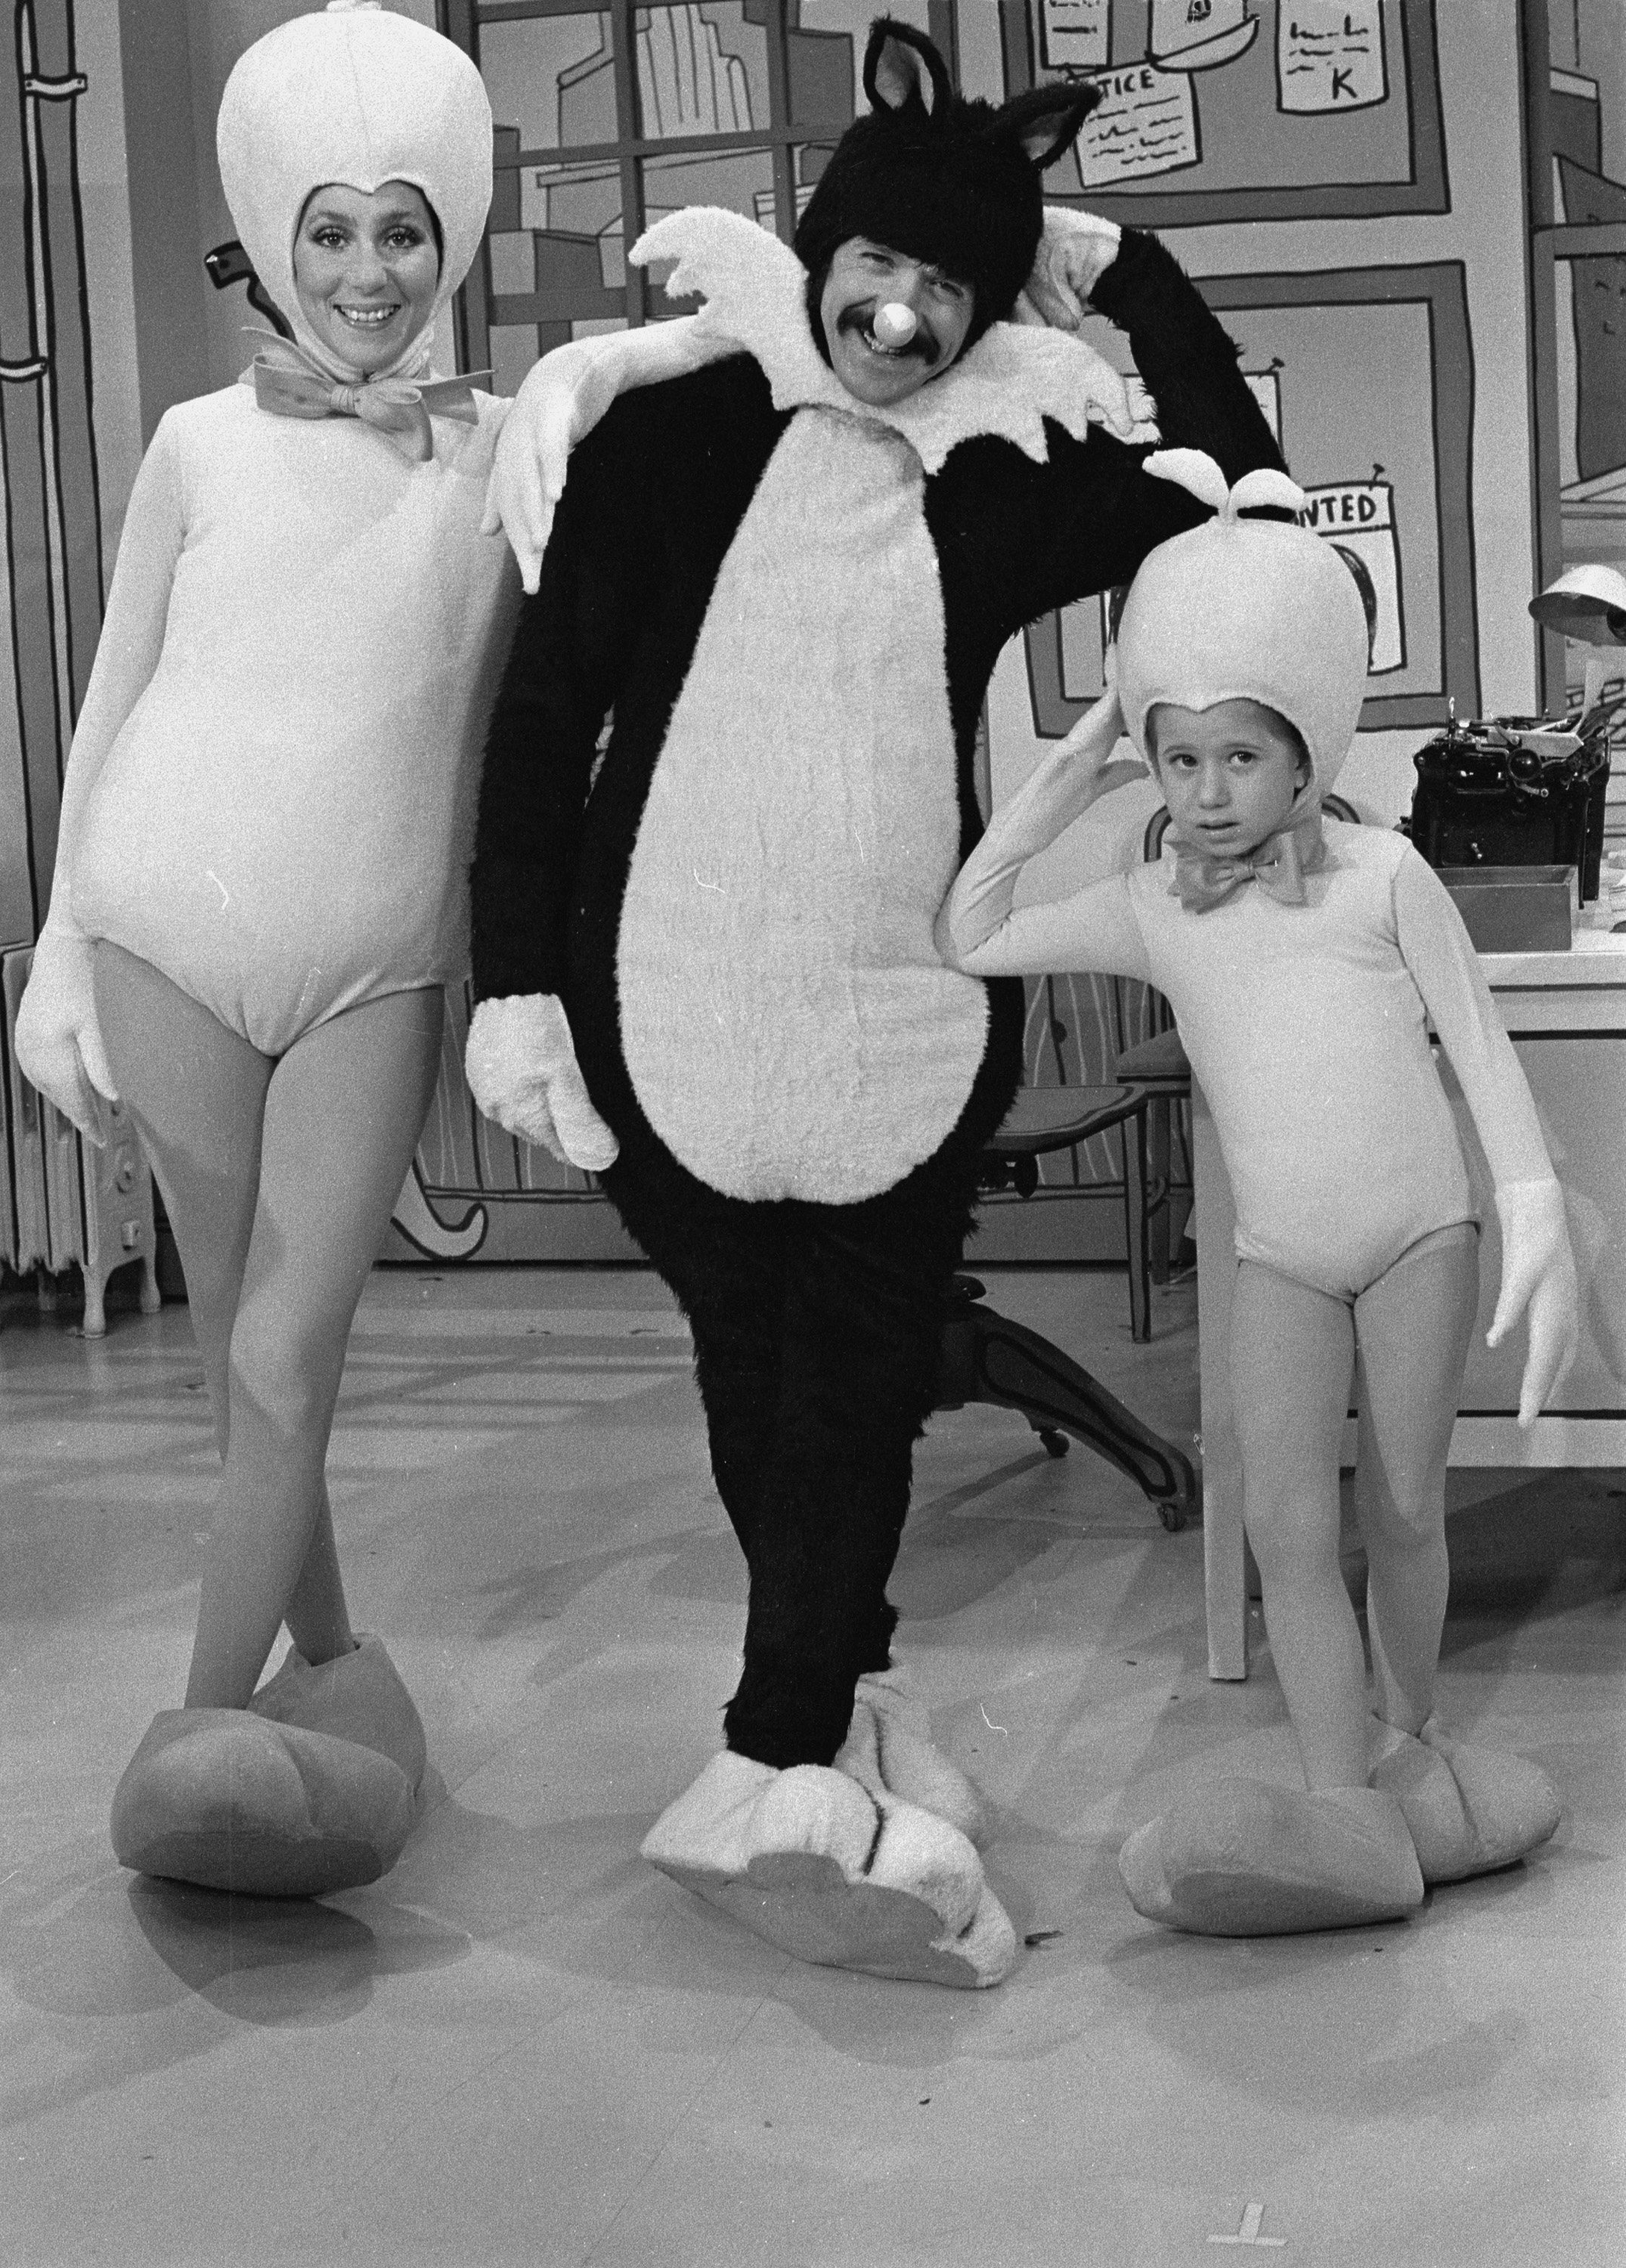 Cher and Sonny Bono pose in Tweety Bird and Slyvester costumes along with their son Chaz, also in a Tweety costume, during a skit from the television variety show "The Sonny and Cher Show," February 19, 1976.| Source: Getty Images